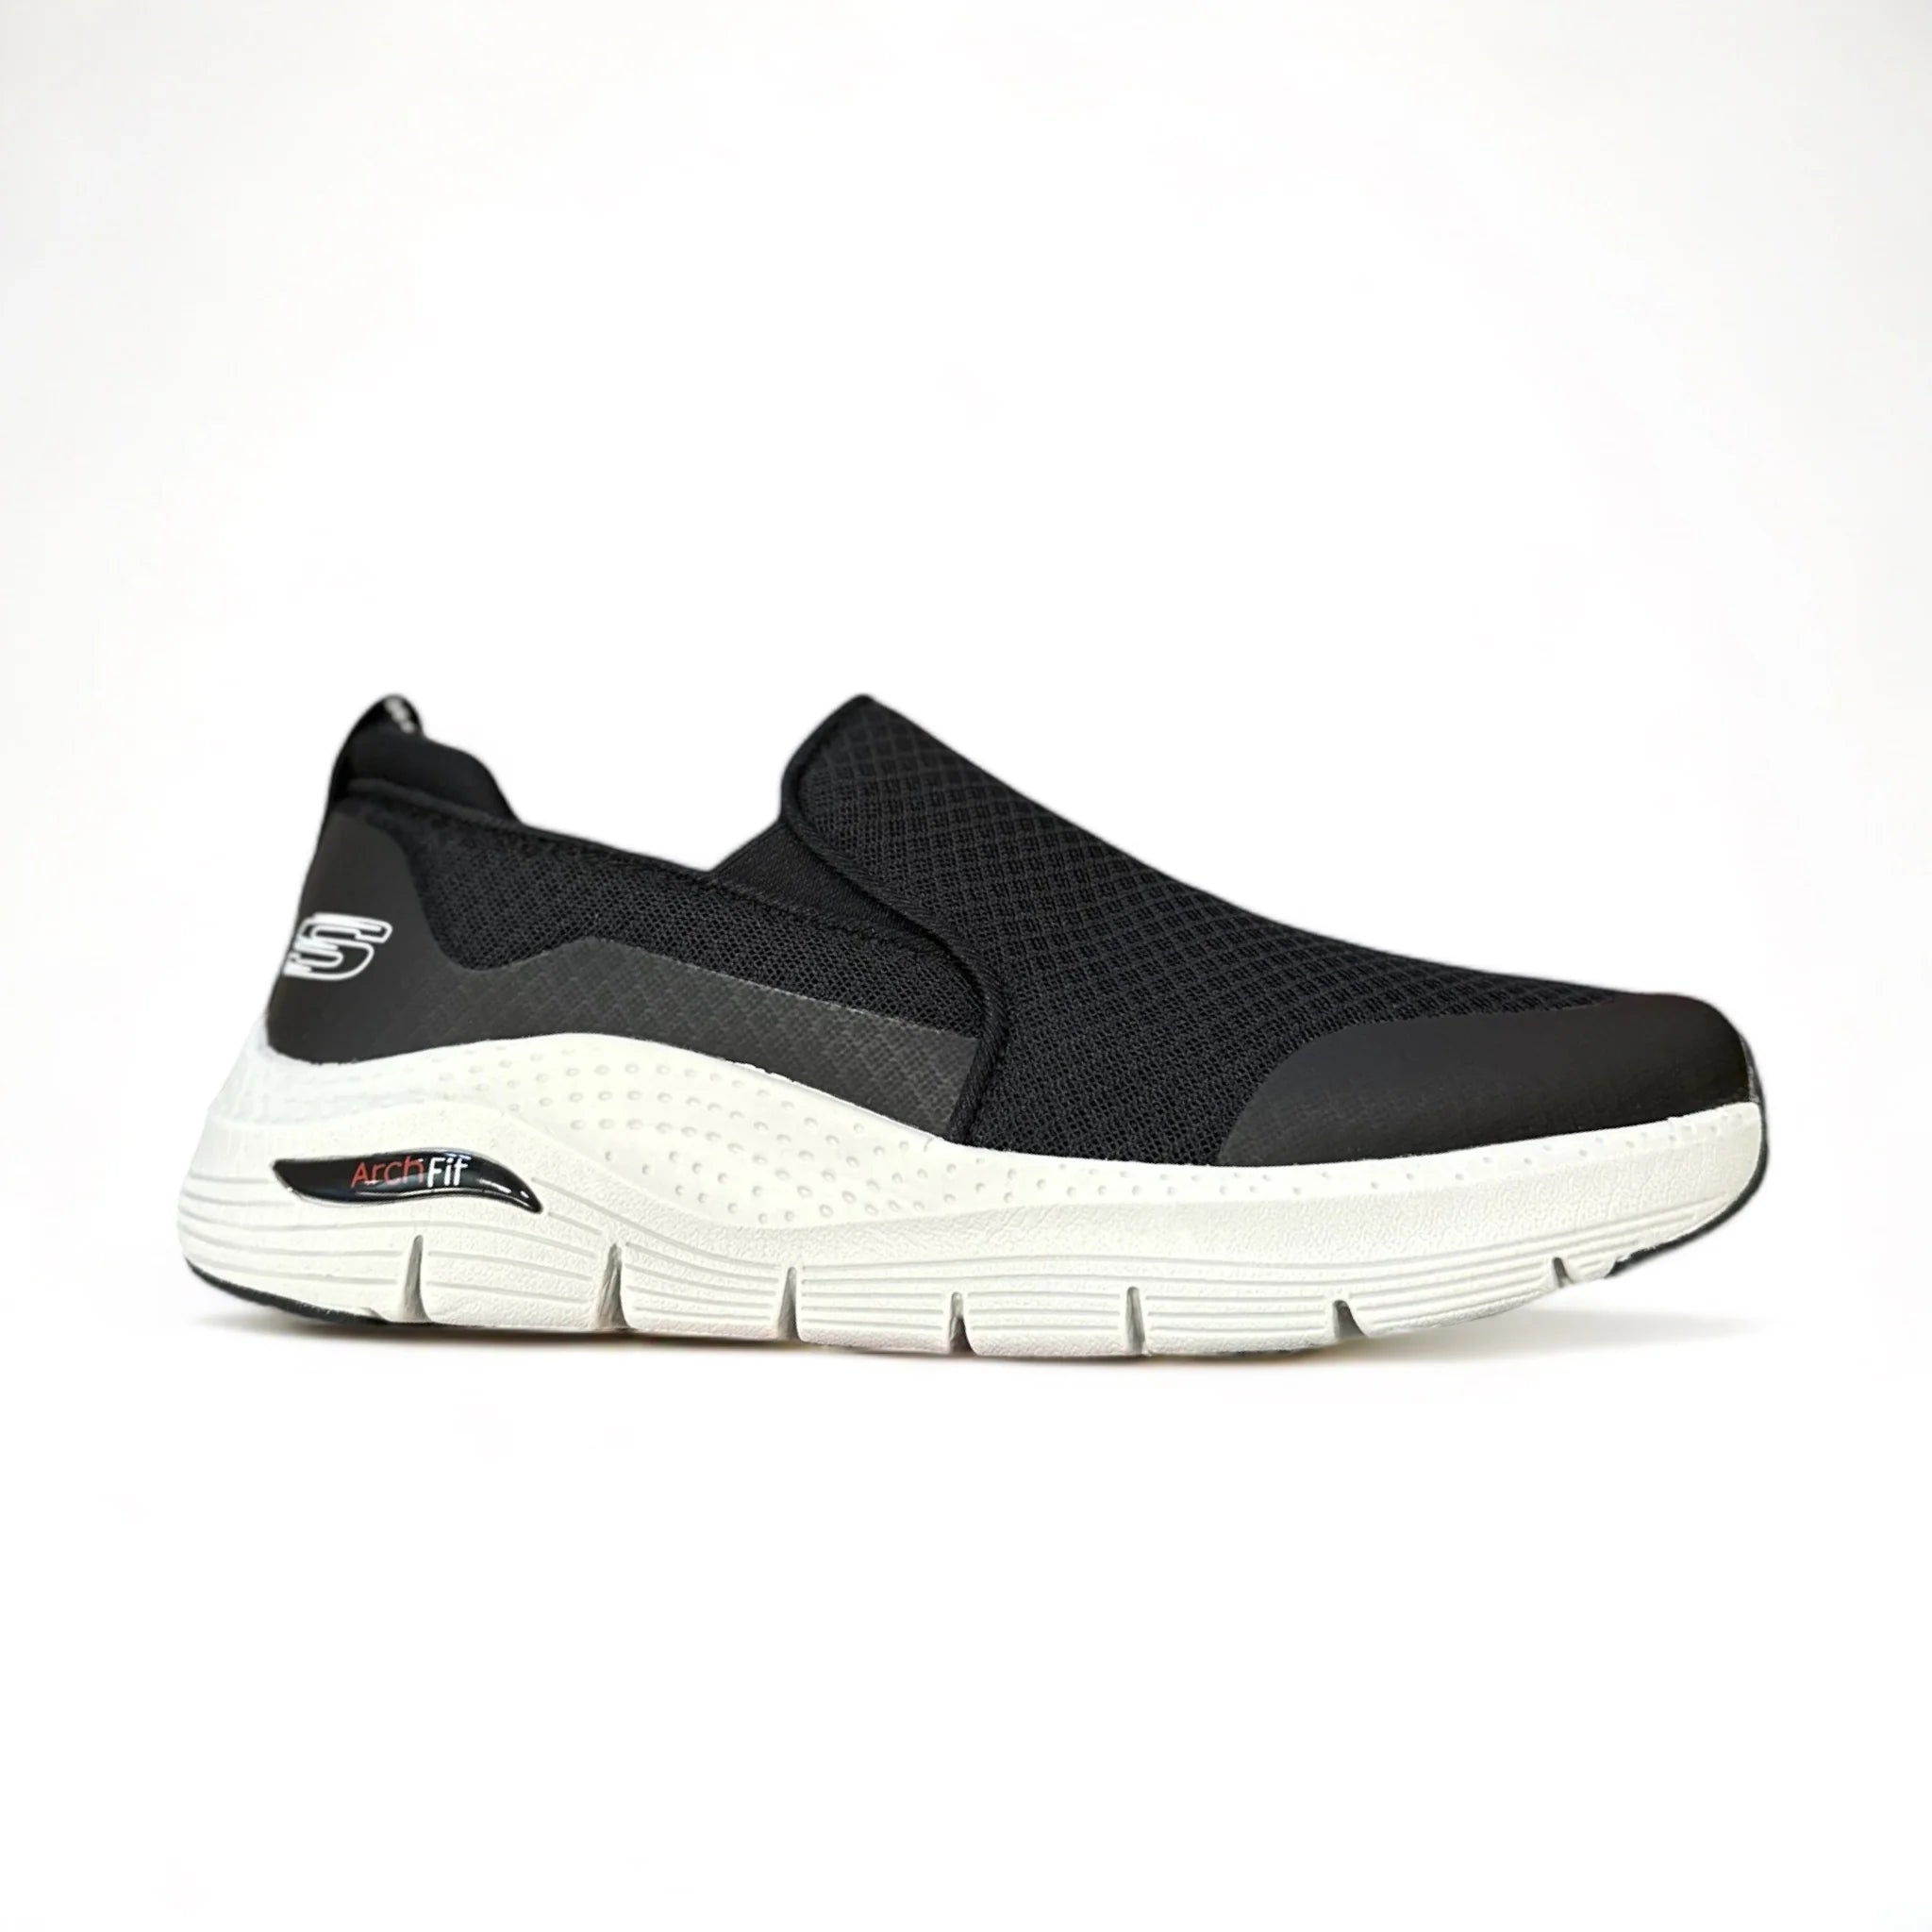 Skechers Arch Fit Black & White